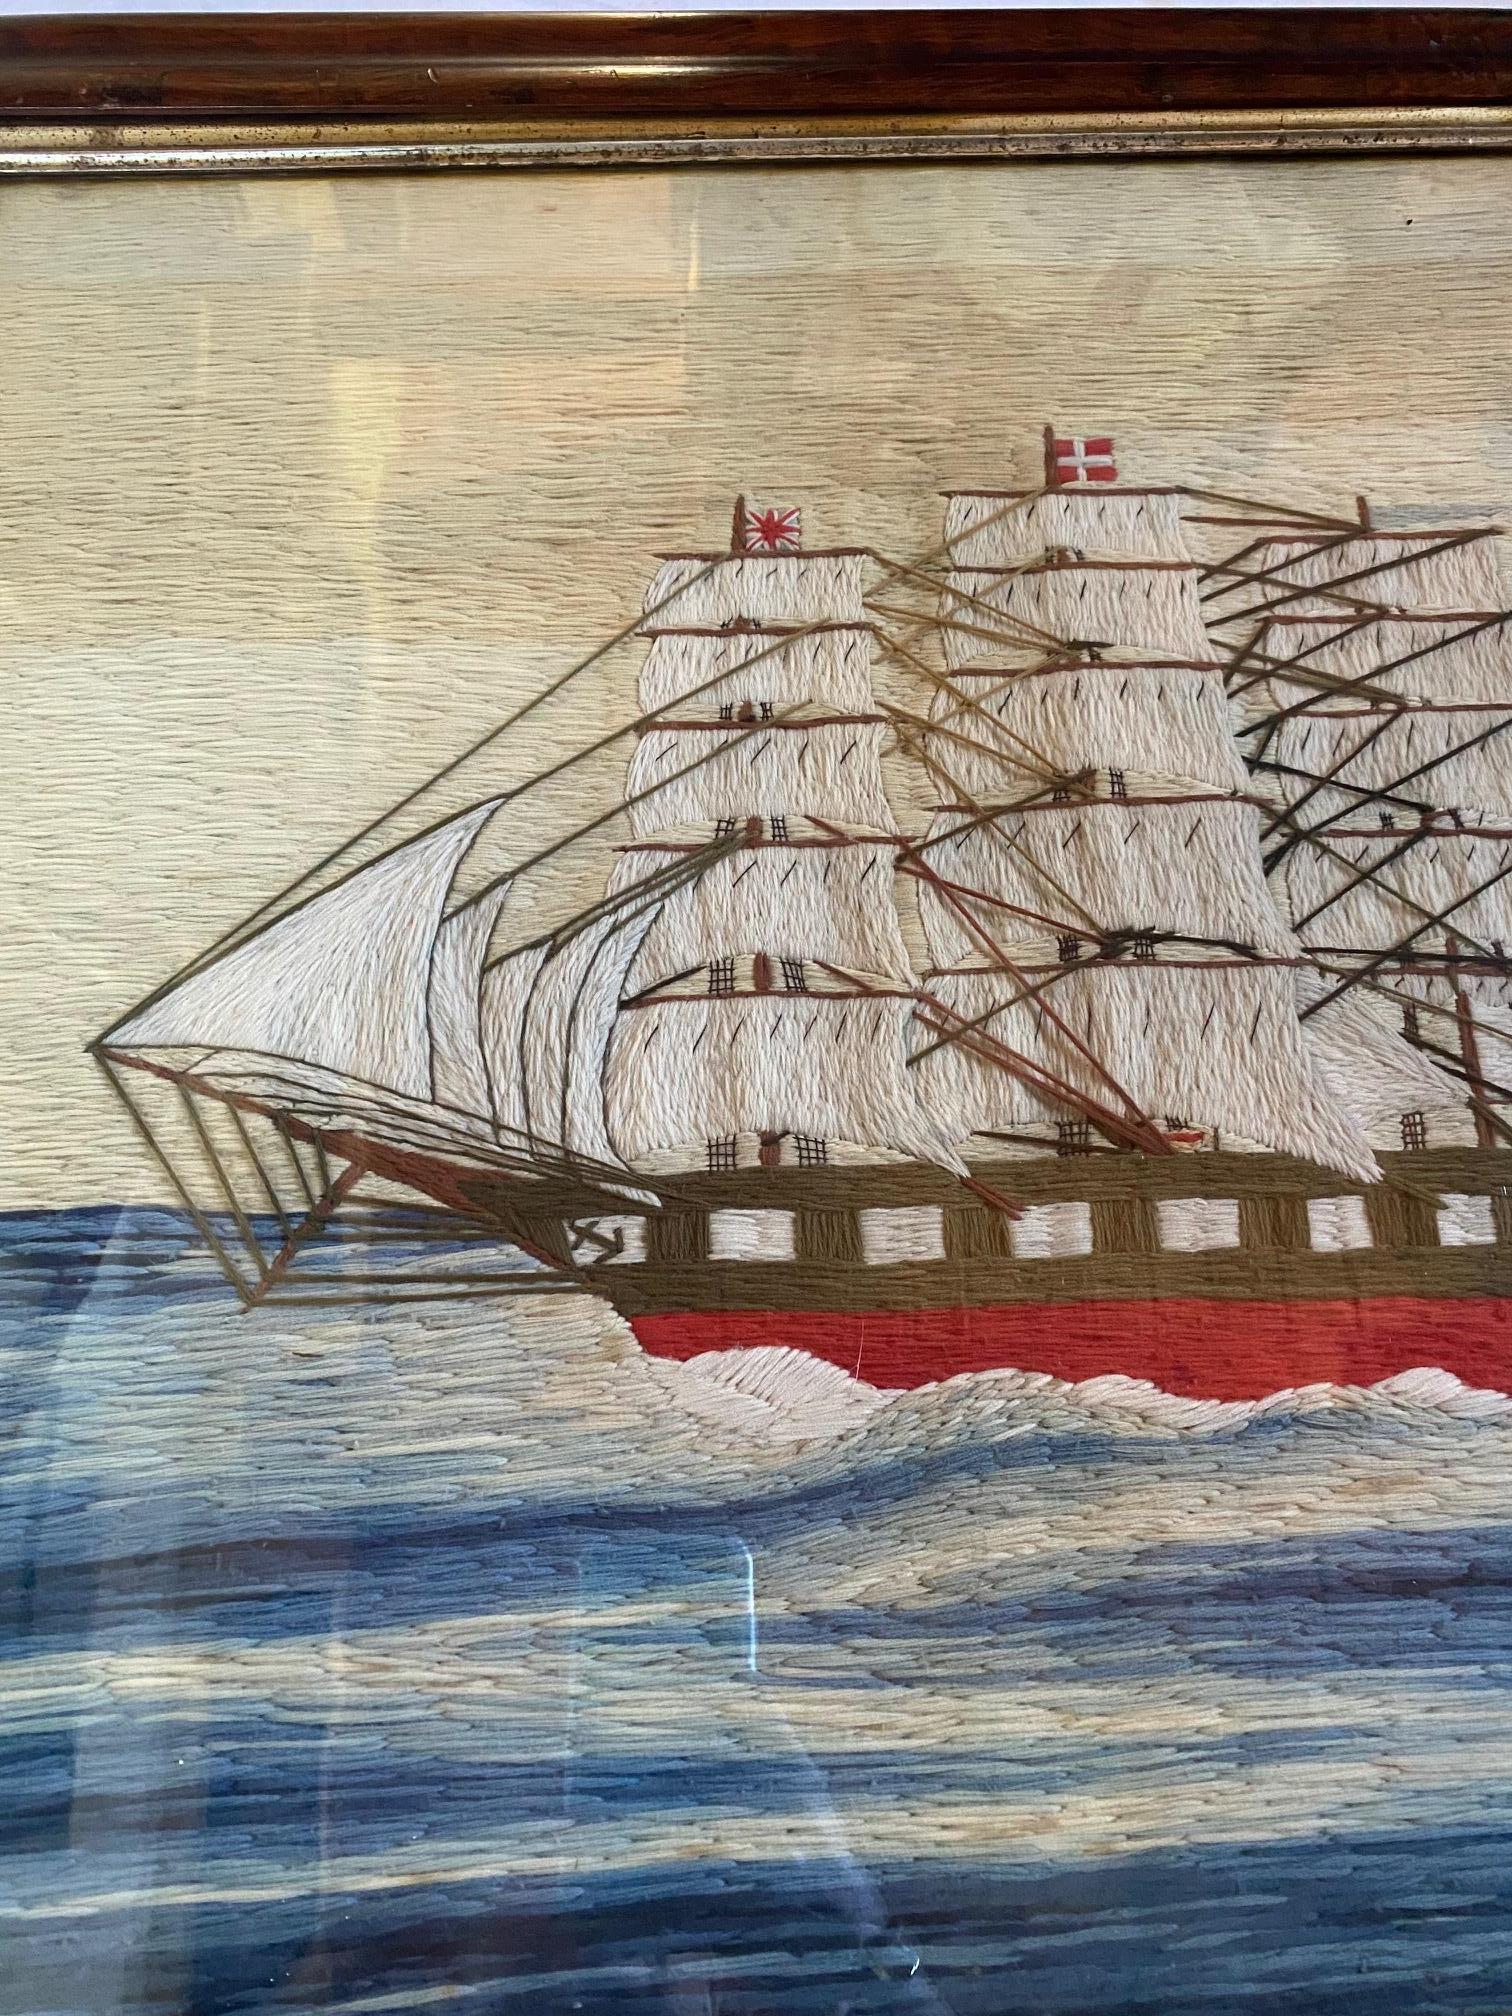 19th century British Sailor’s Woolie of a Ship-of-the-Line, circa 1840, depicting a fully rigged ship under full sail, with Union Jack on foremast peak, Admiral’s pennant on the Main, and signal flags and Red Ensign strung off backstay; mounted in a